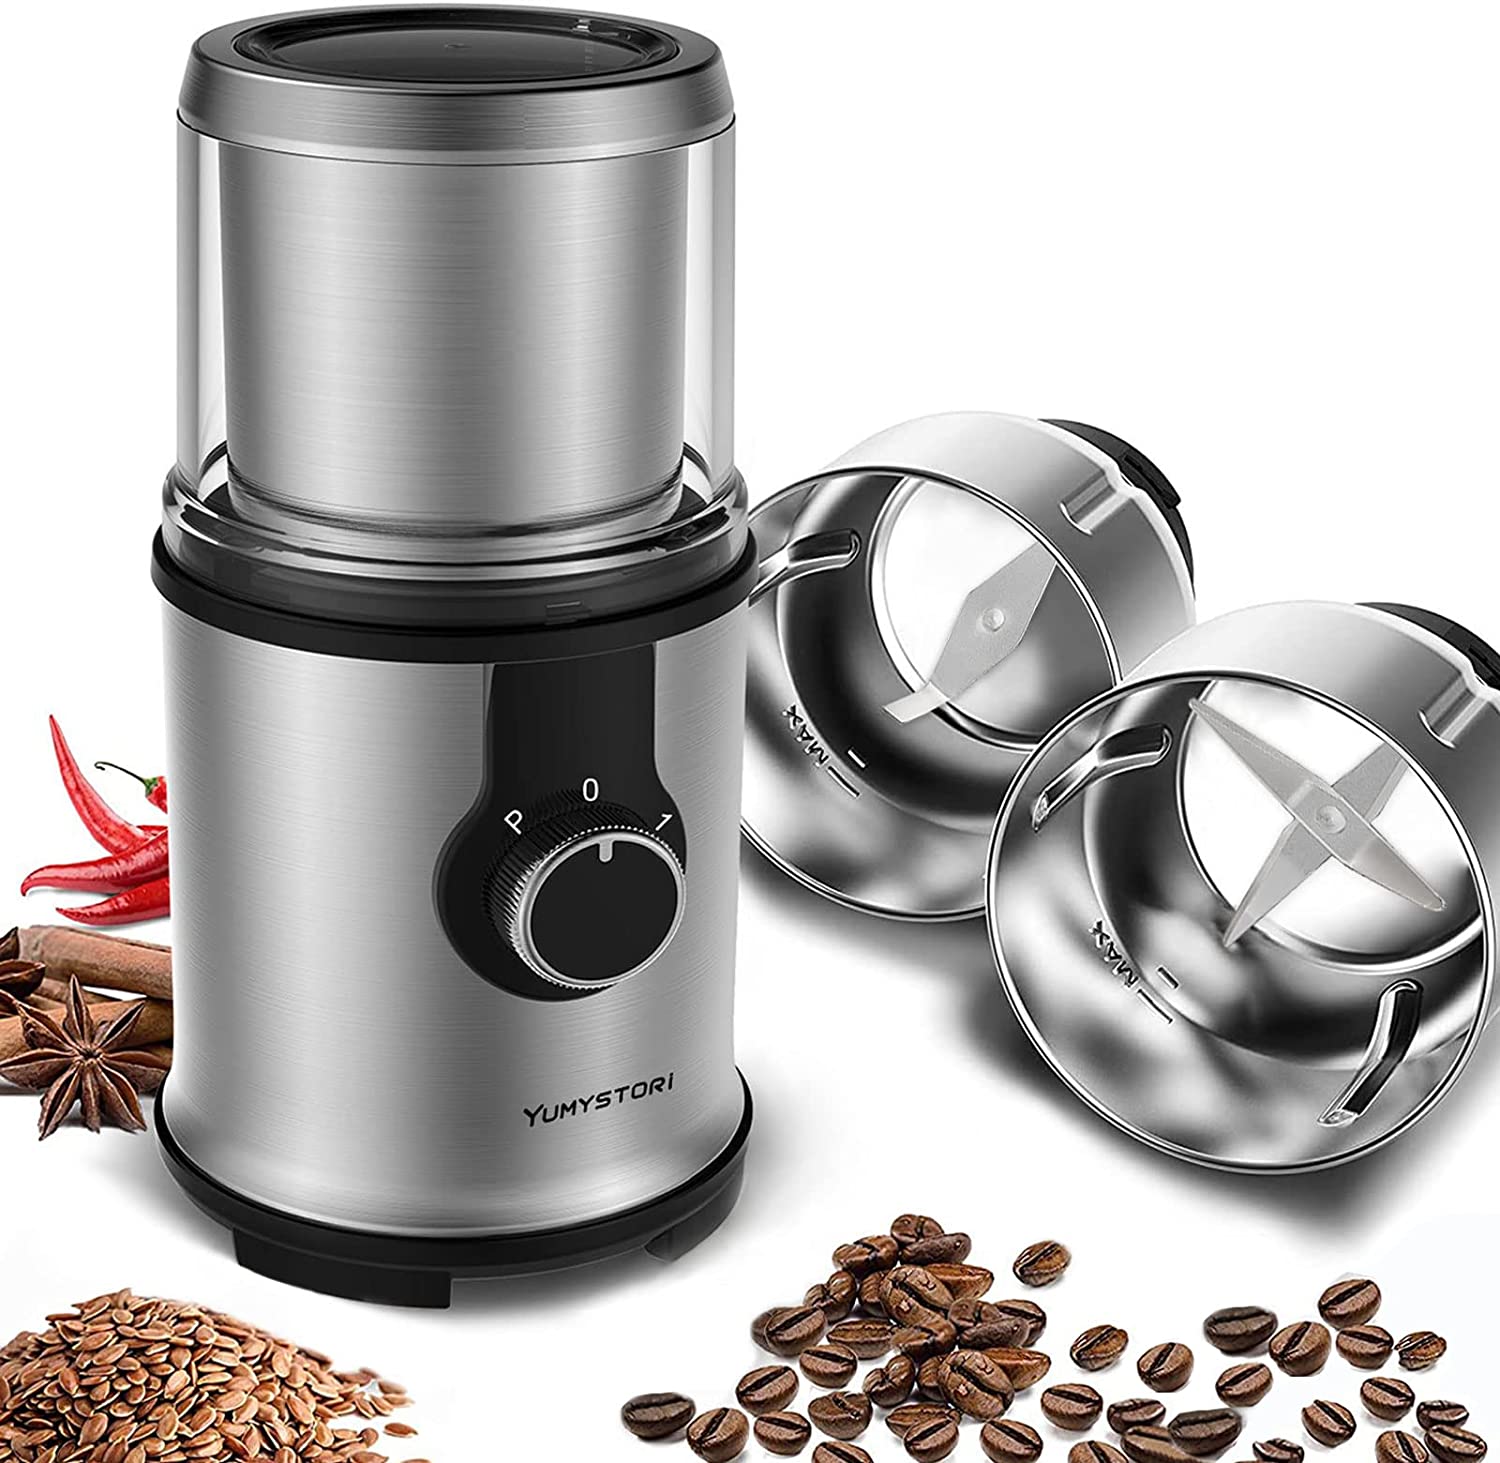 Yumystori Electric Coffee Grinder, 350 W Spice Mill, Electric and Coffee Grinder, 110 g Capacity, Electric Coffee Grinder, Stainless Steel for Coffee Beans, Flax Seeds, Nuts, Spices, Grains